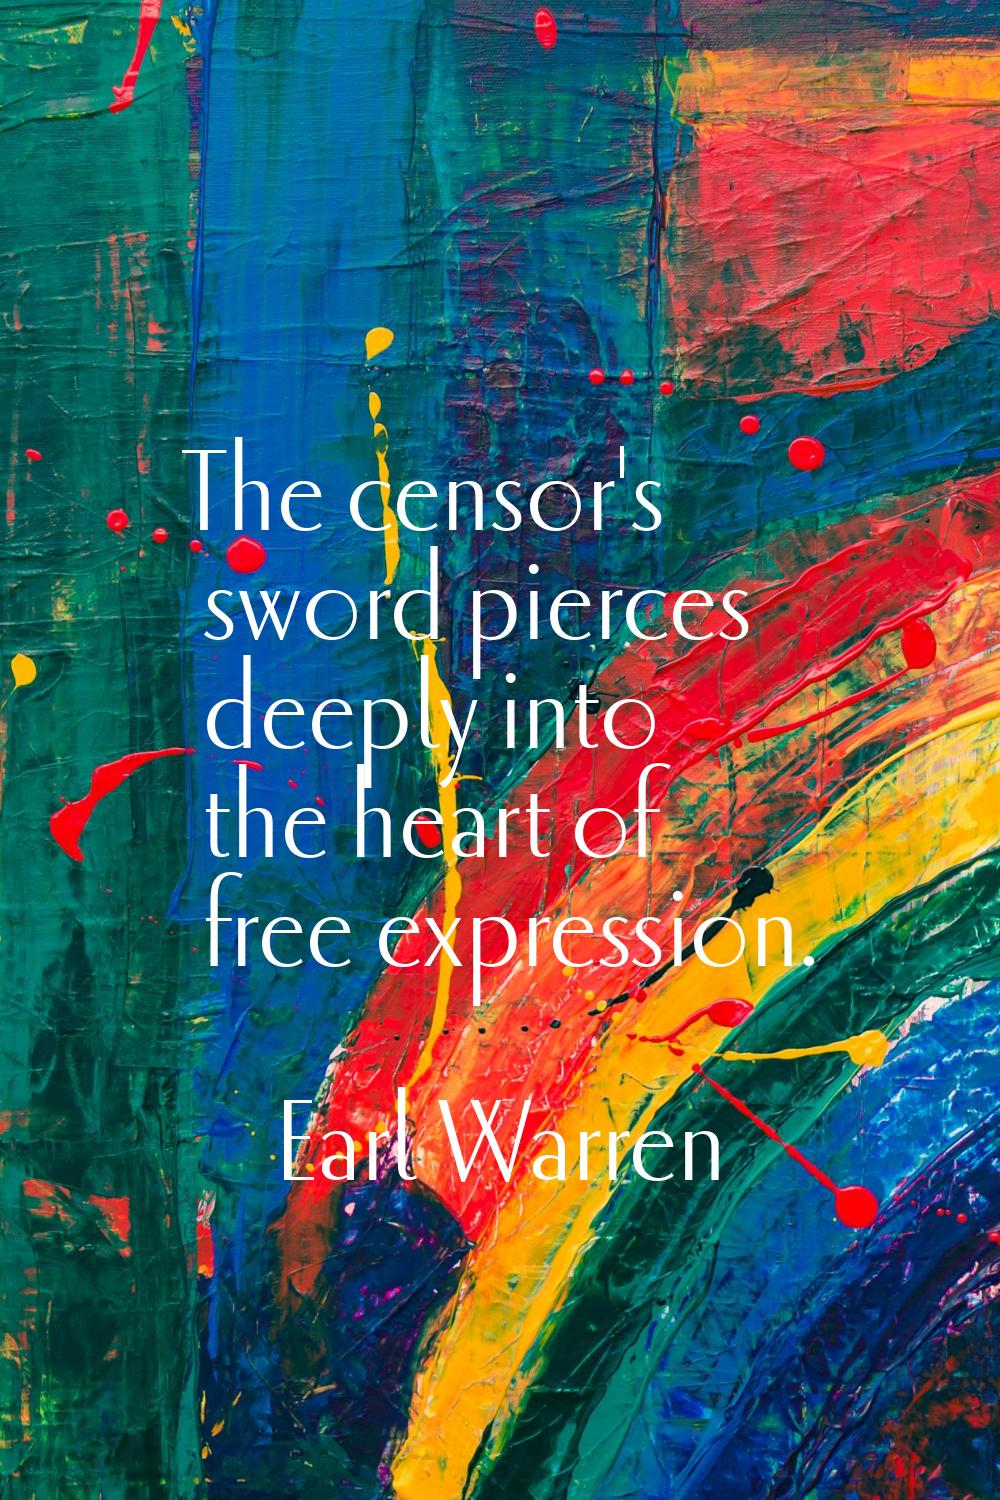 The censor's sword pierces deeply into the heart of free expression.